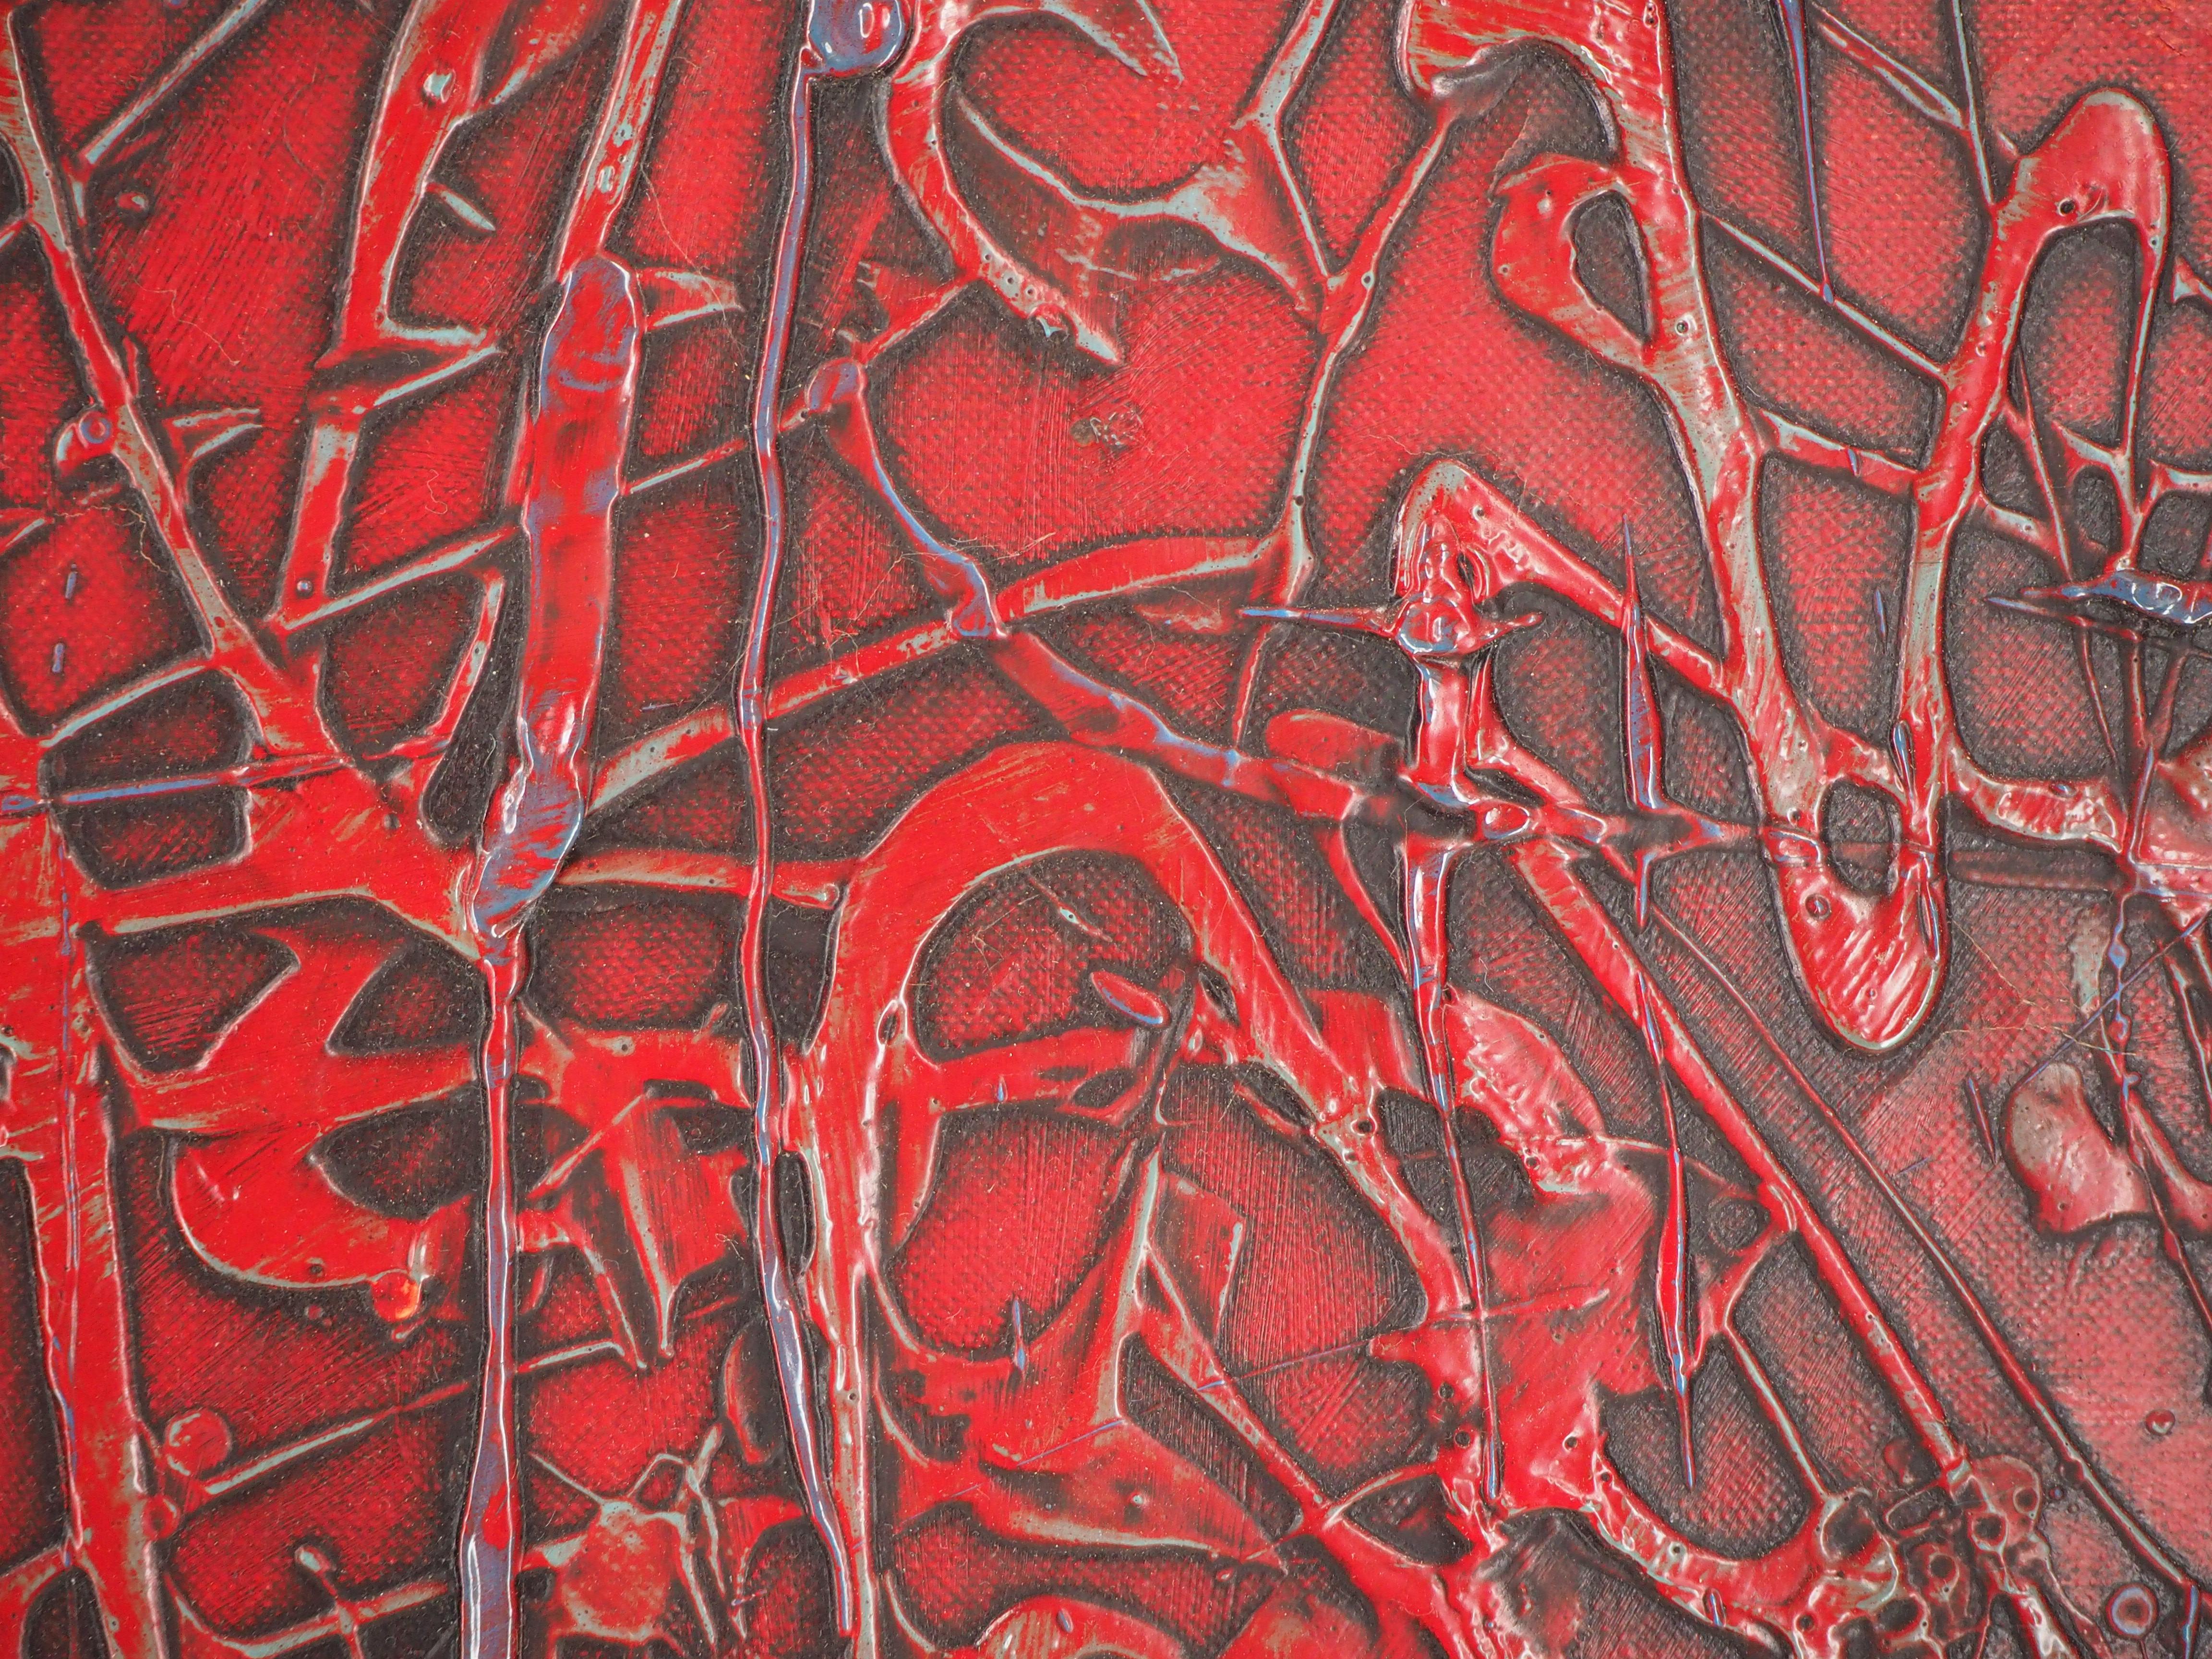 Abstraction in Red - Original oil on canvas - Signed 1